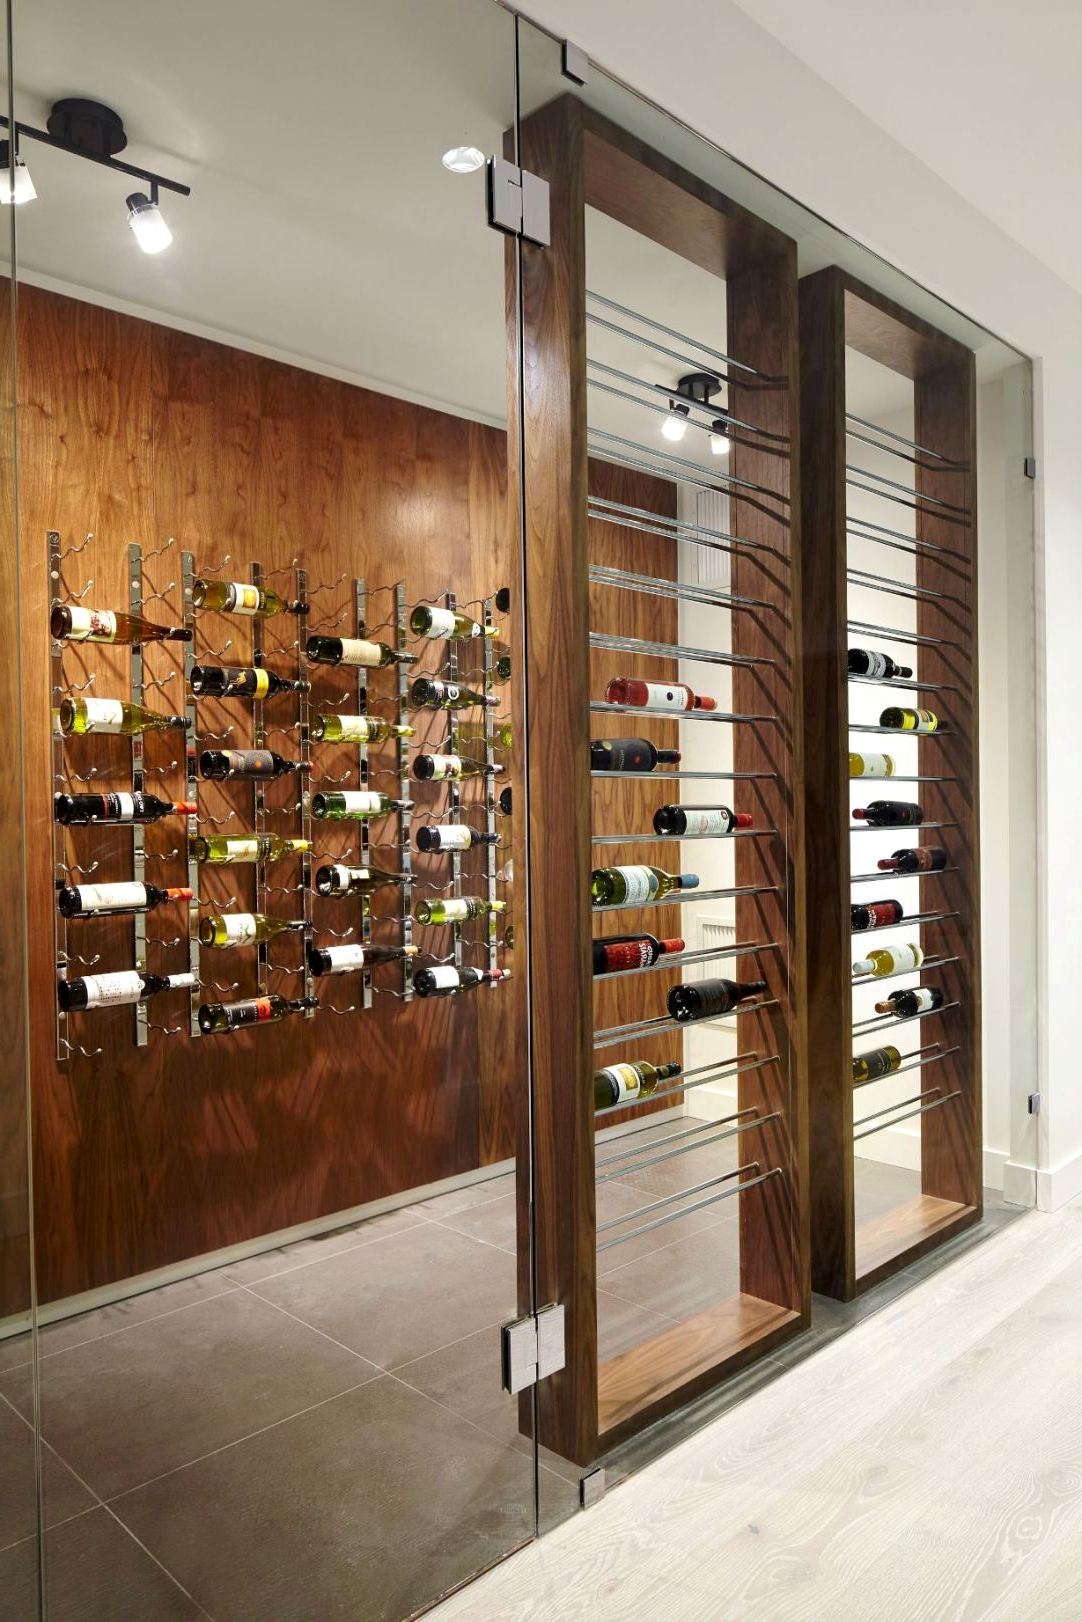 Customized Wine Rack Design Created by an Orange County Builder for a Residential Property 